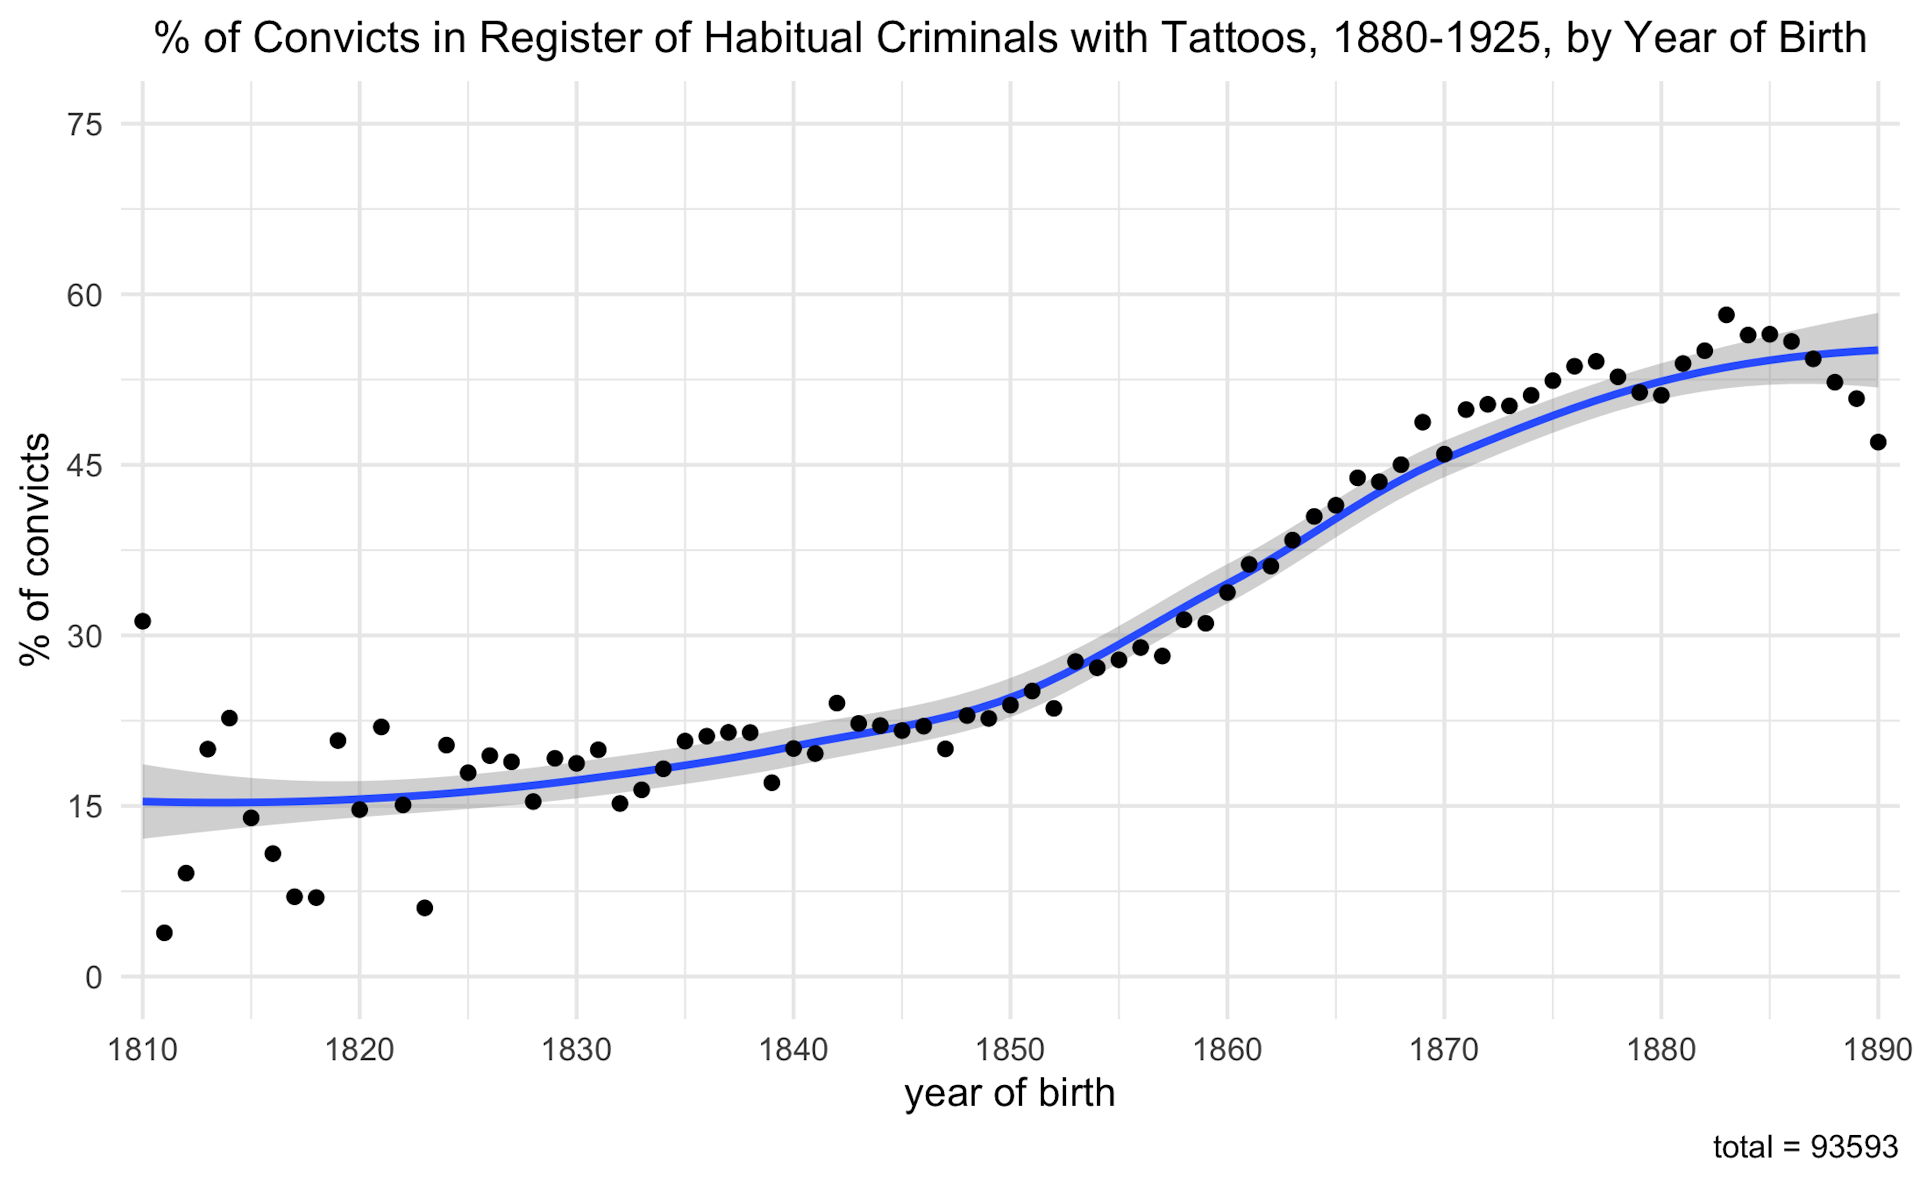 Tattoo popularity over time